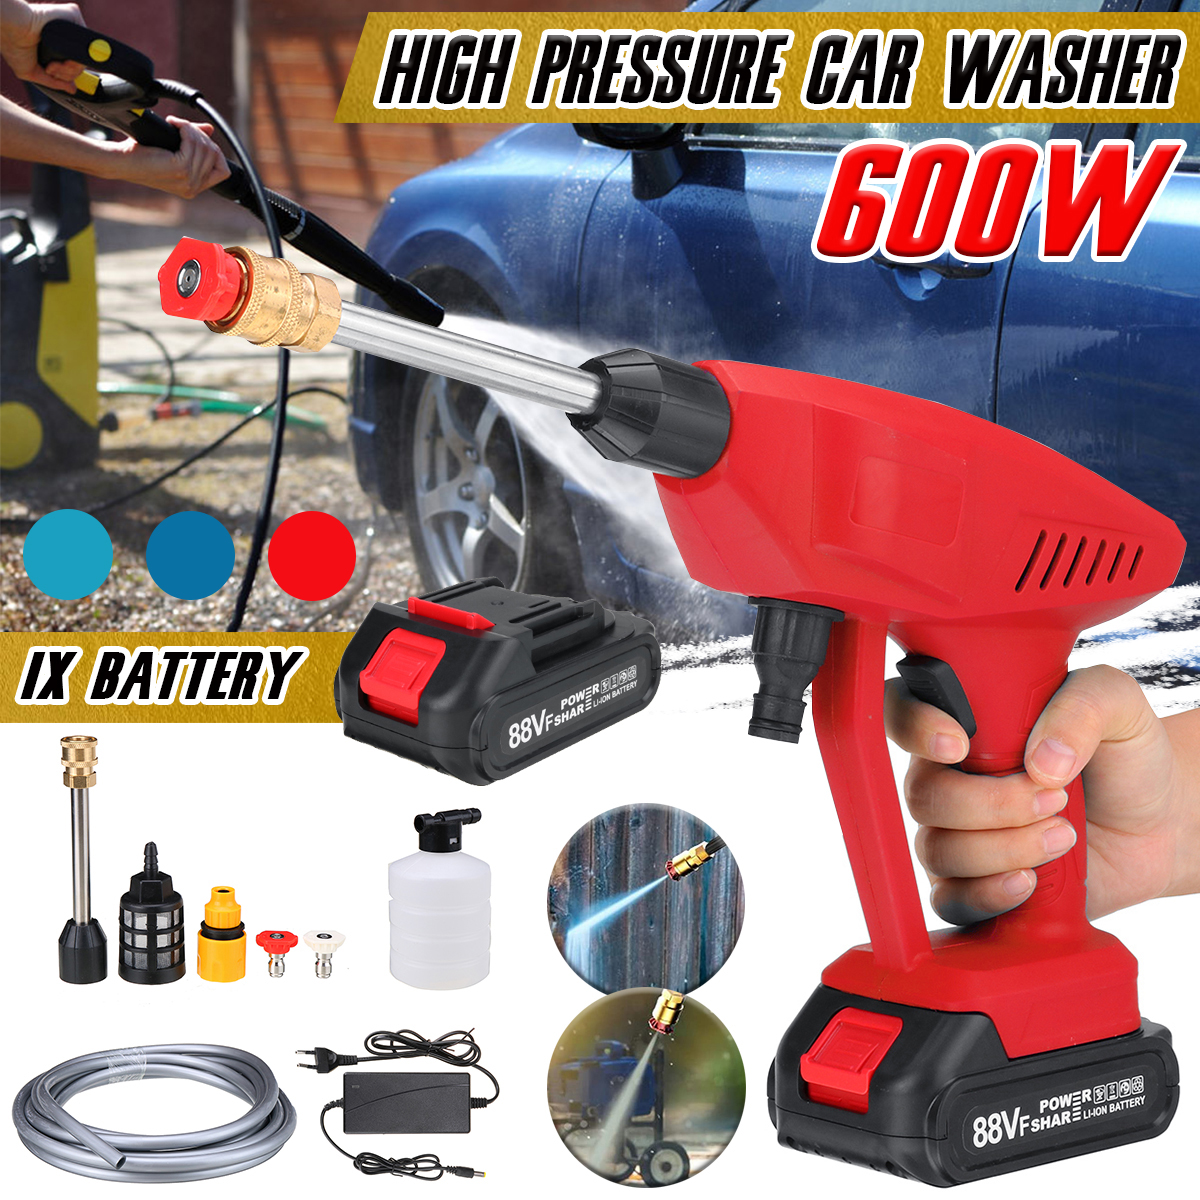 600W-Cordless-High-Pressure-Car-Power-Washer-Spray-Guns-Wand-Lance-Nozzle-Tips-Hose-Kit-W-Battery-Fo-1872419-1